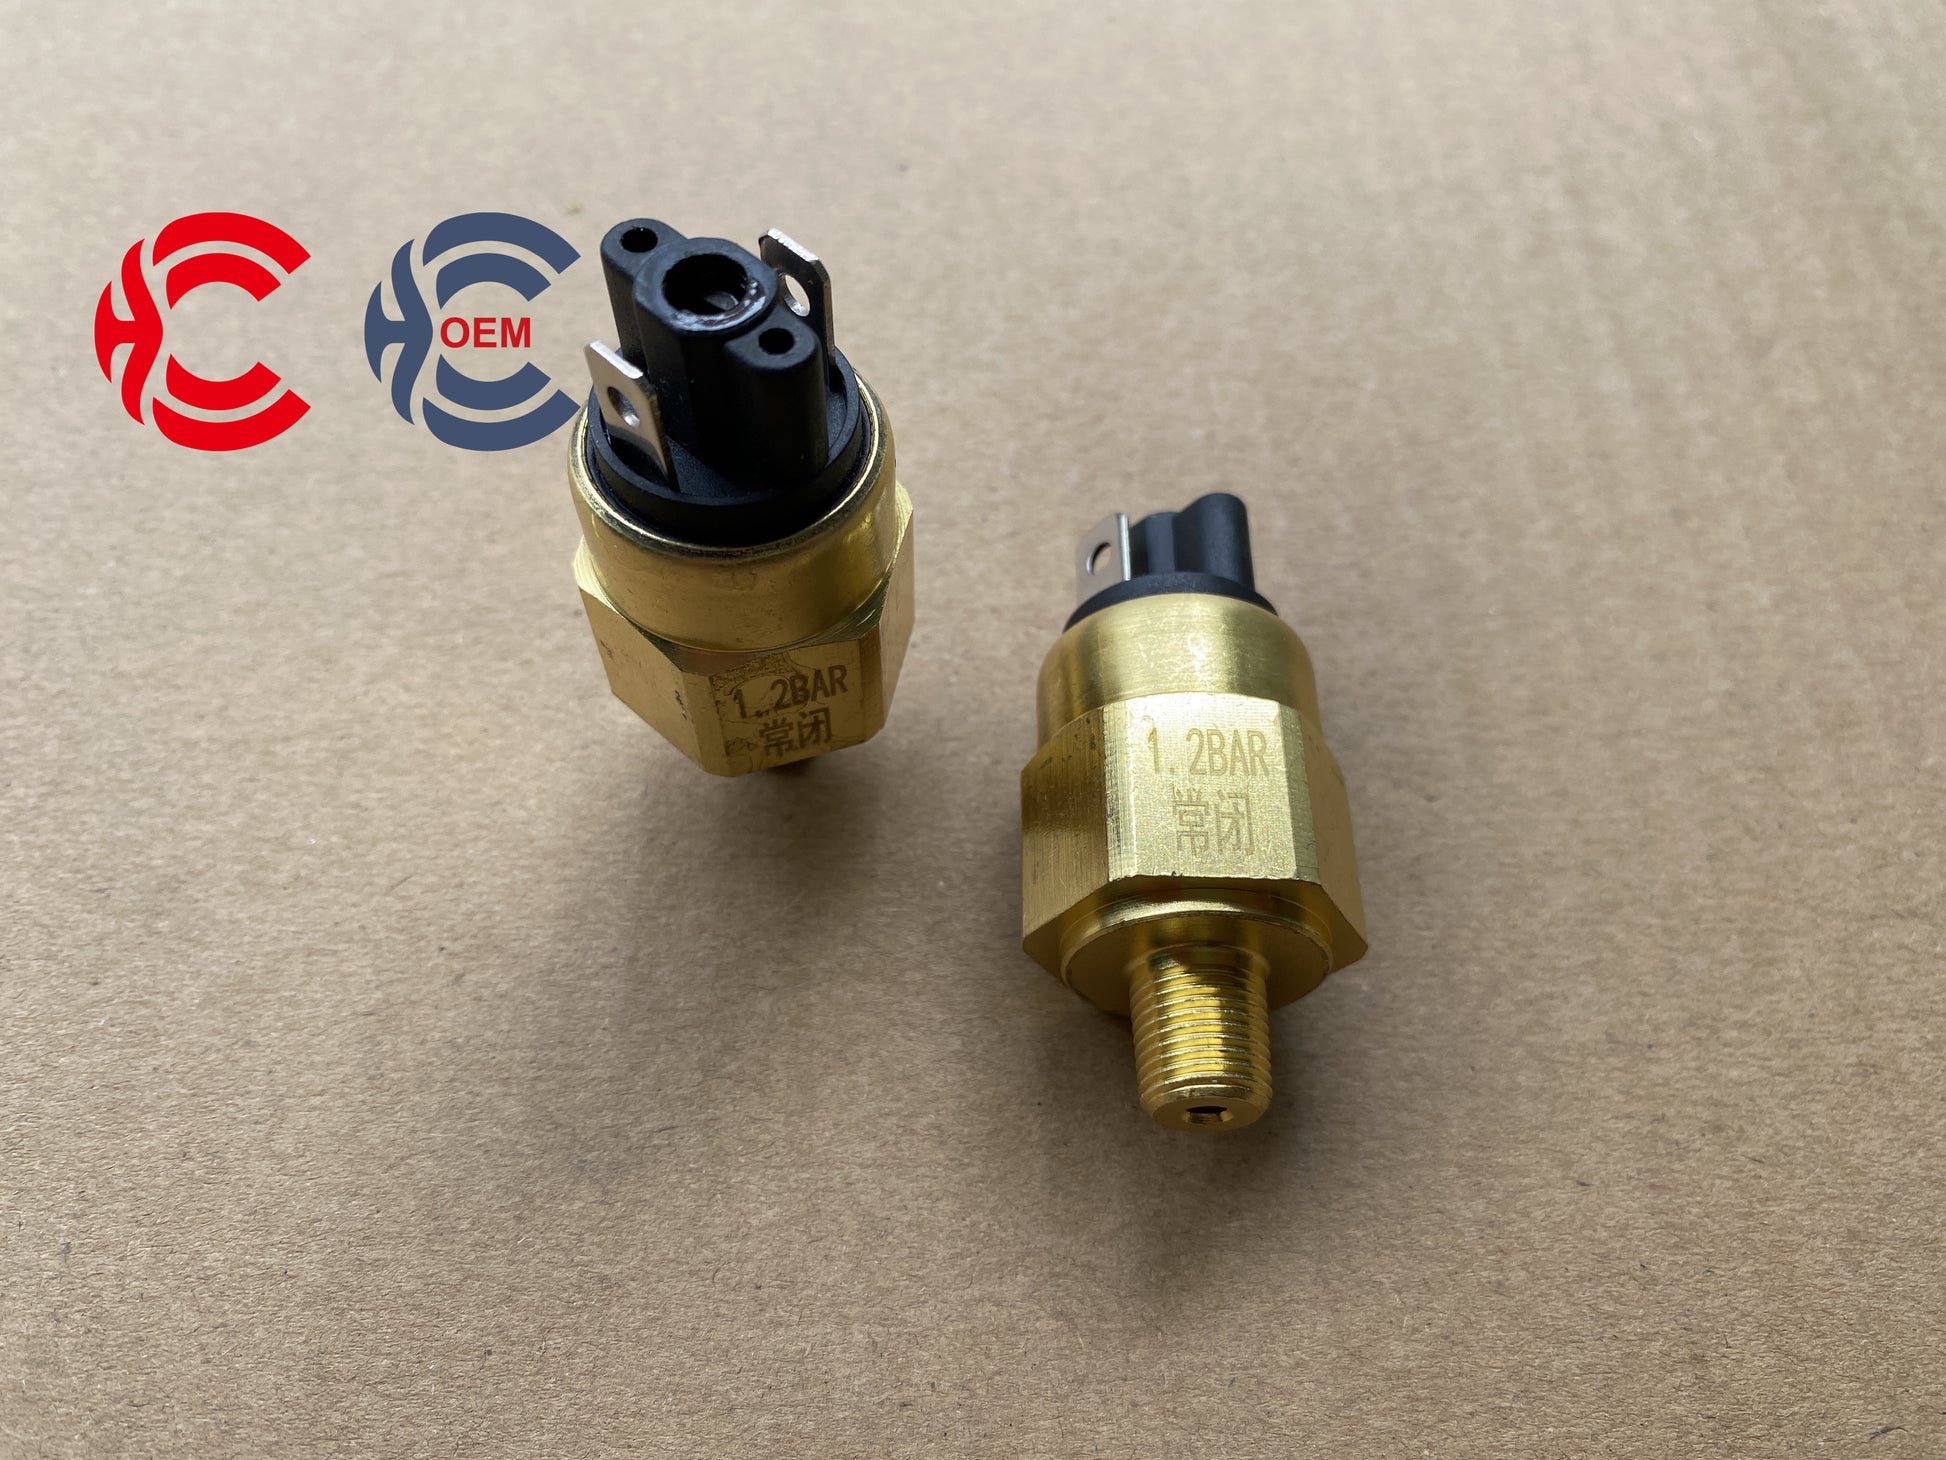 OEM: 1.2BAR NC Door Pump Gas Pressure Switch Material: ABS MetalColor: Black SilverOrigin: Made in ChinaWeight: 50gPacking List: 1* Gas Pressure Switch More ServiceWe can provide OEM Manufacturing serviceWe can Be your one-step solution for Auto PartsWe can provide technical scheme for you Feel Free to Contact Us, We will get back to you as soon as possible.